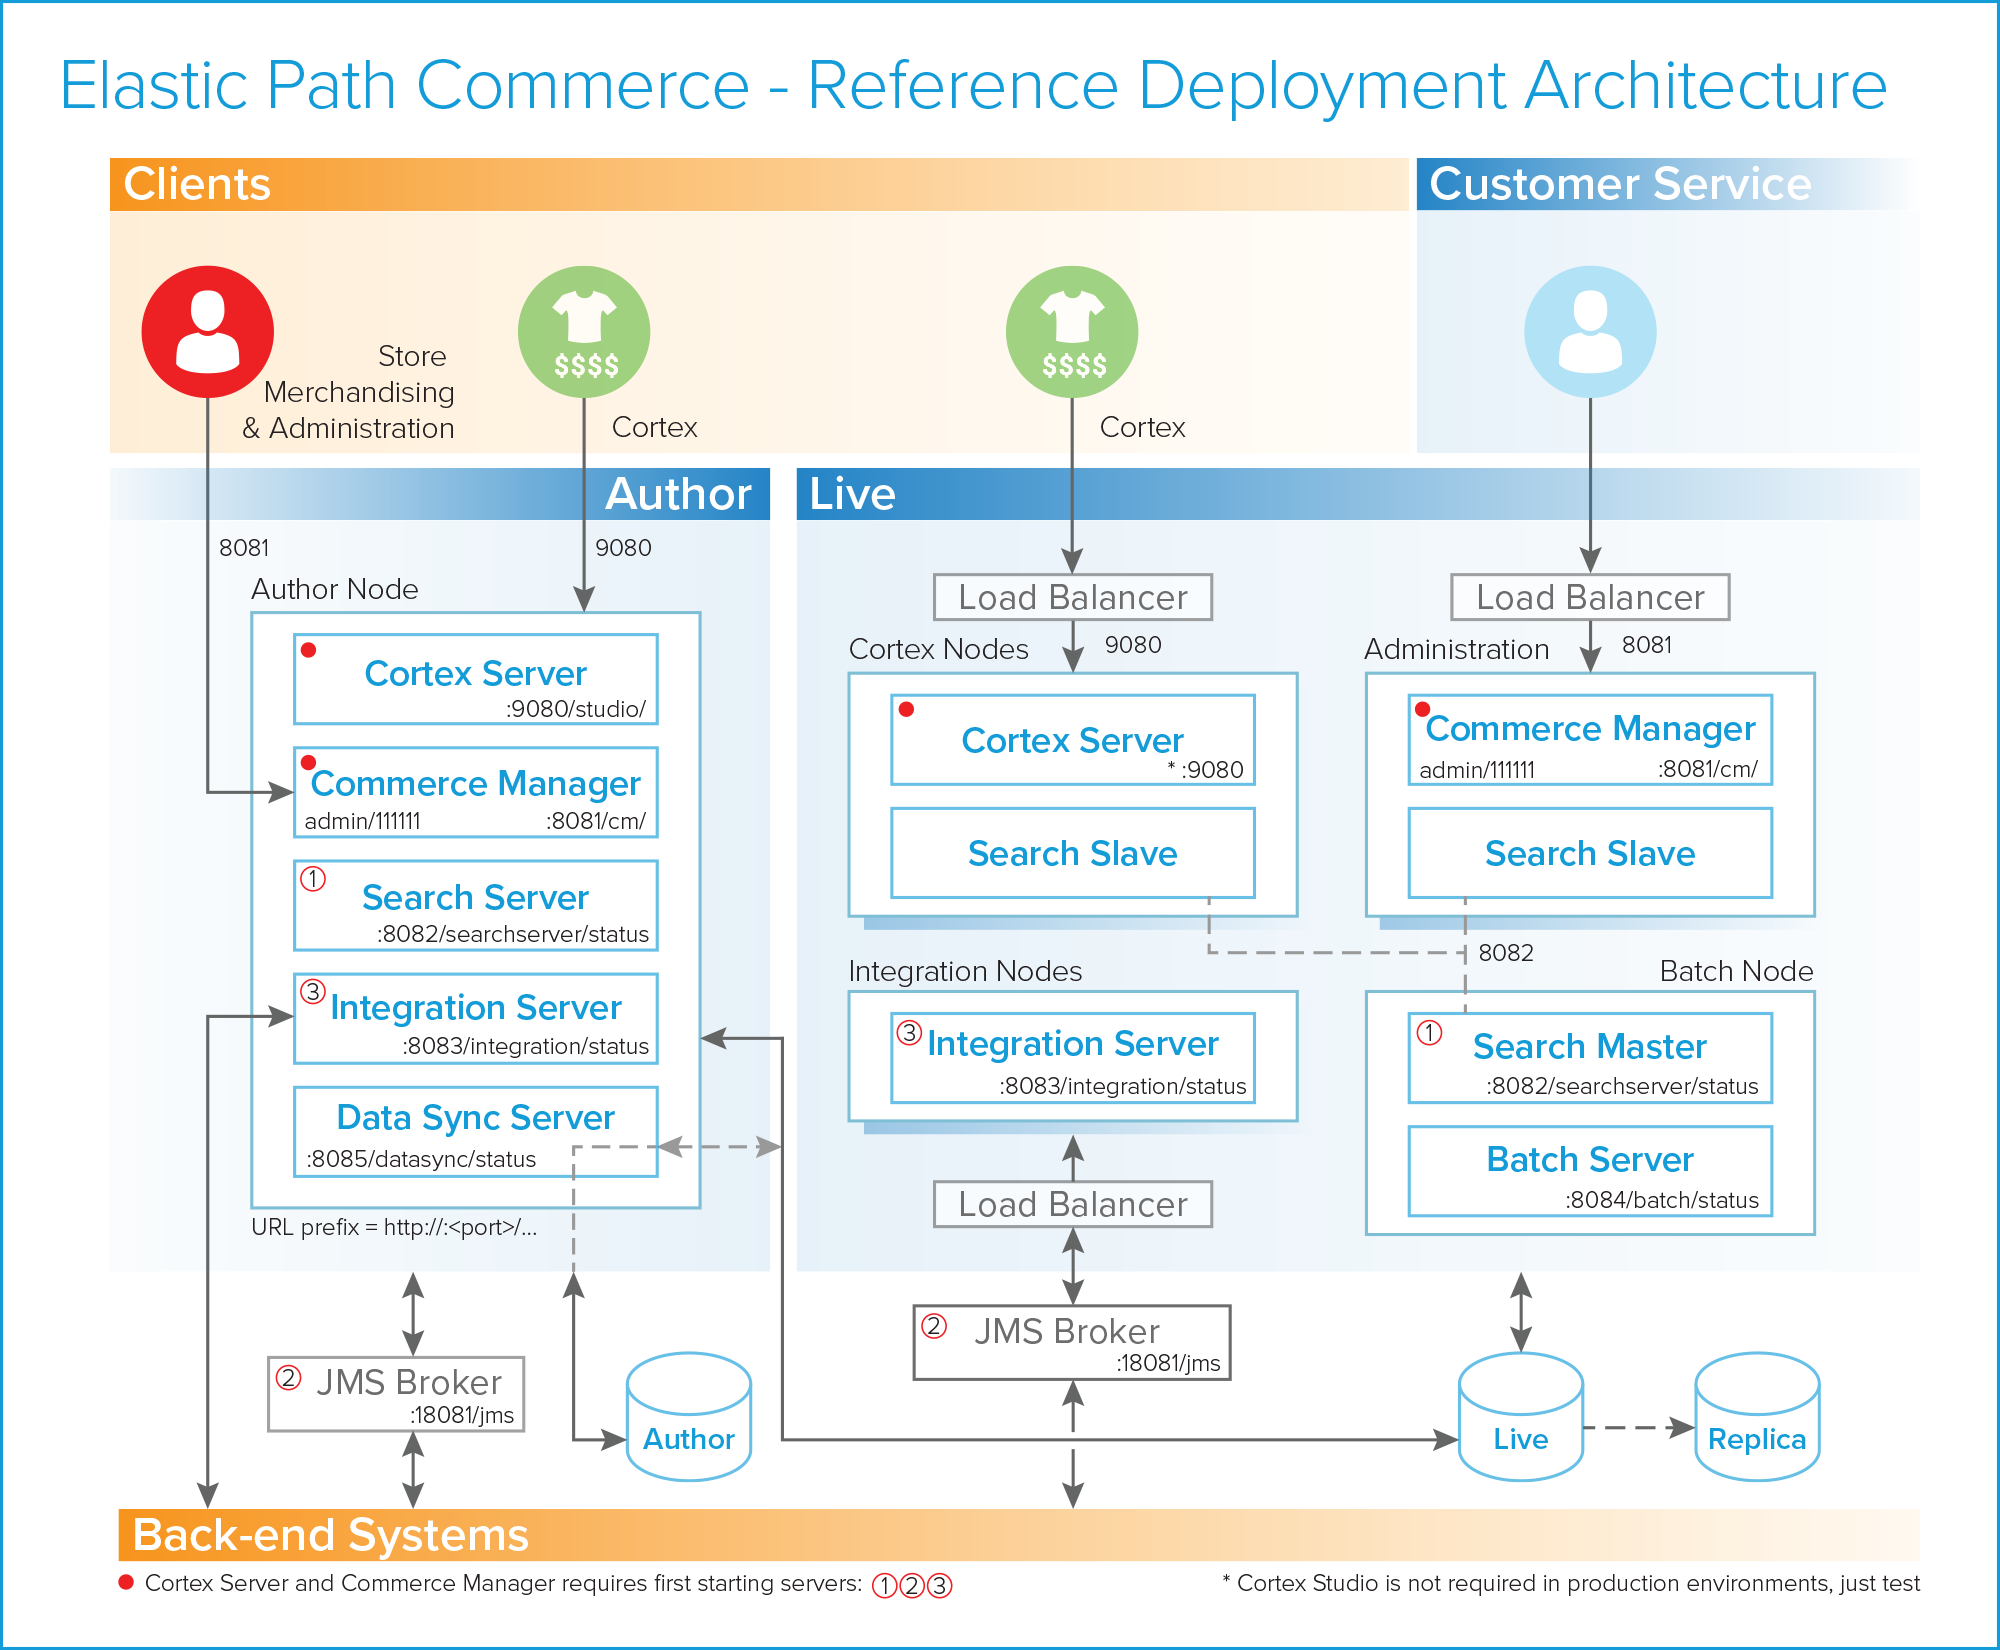 Elastic Path Commerce Reference Deployment Architecture